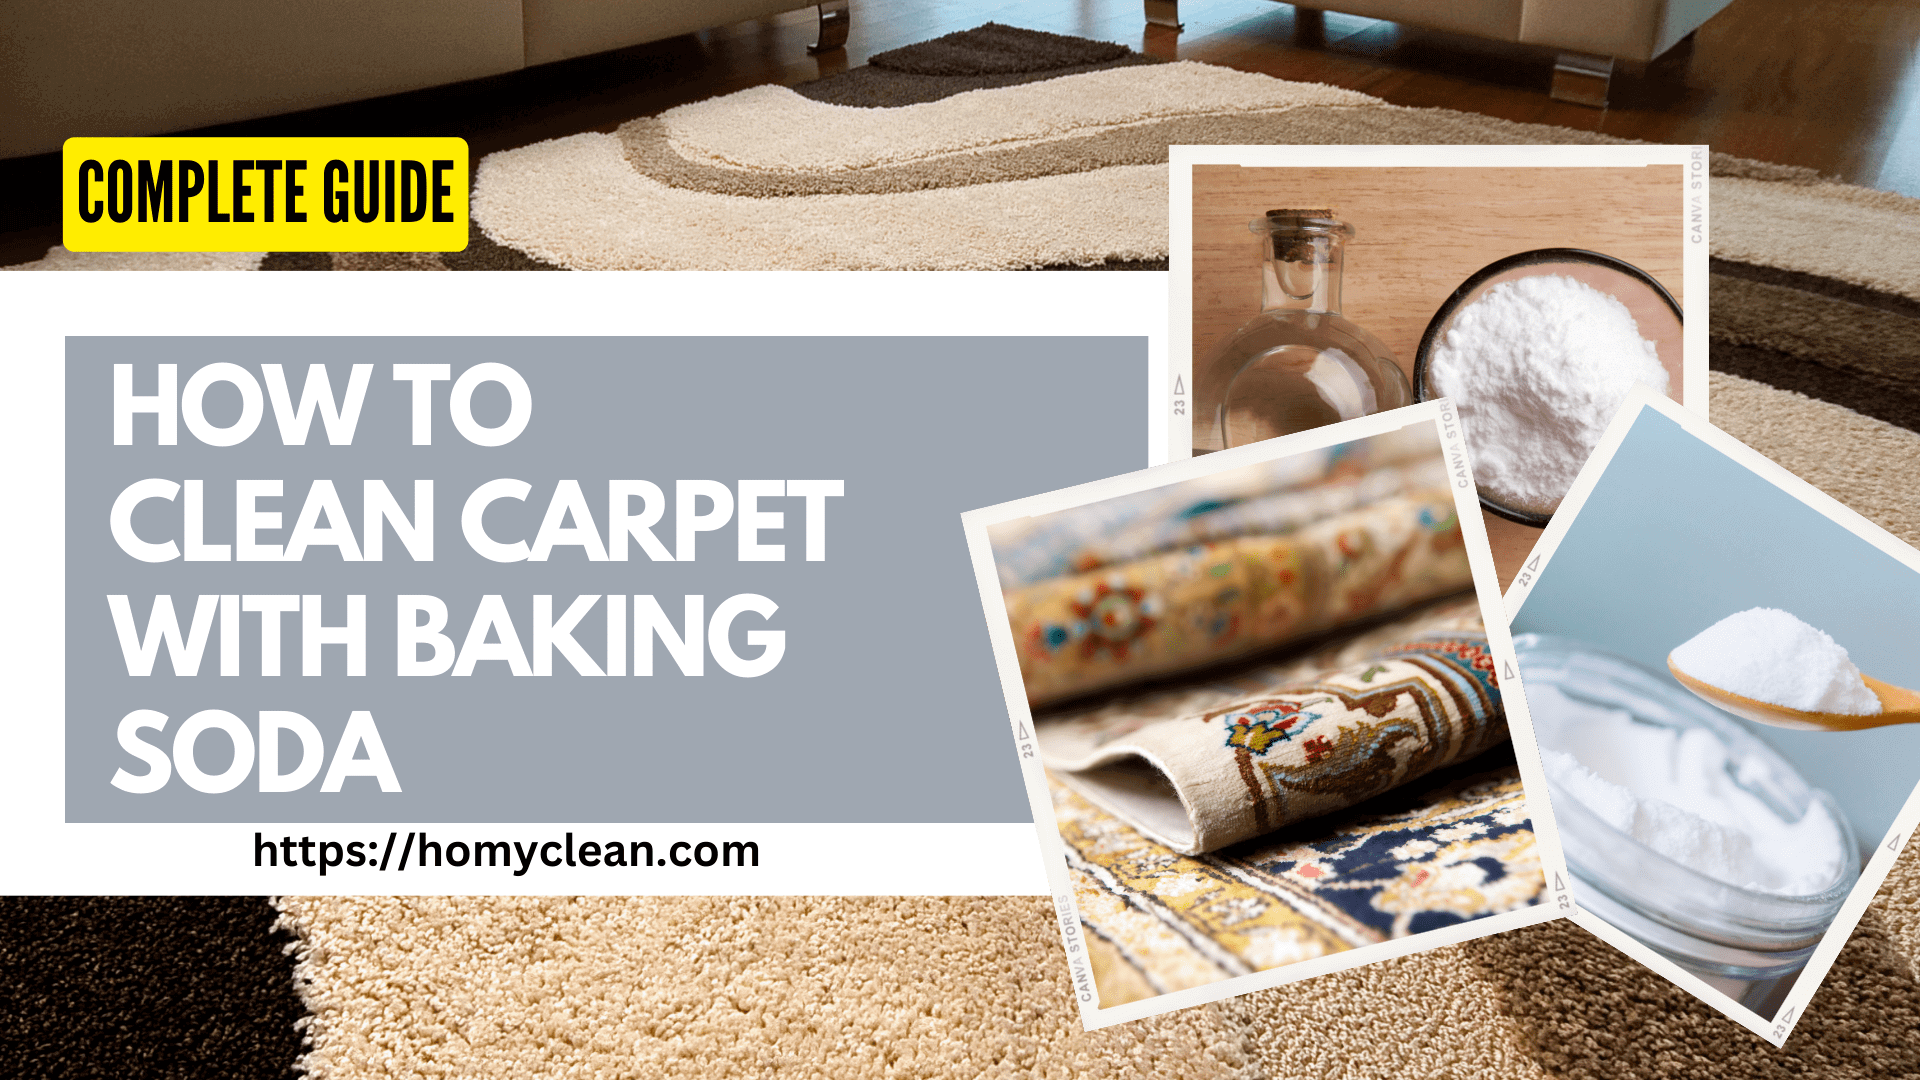 How to Clean Carpet With Baking Soda